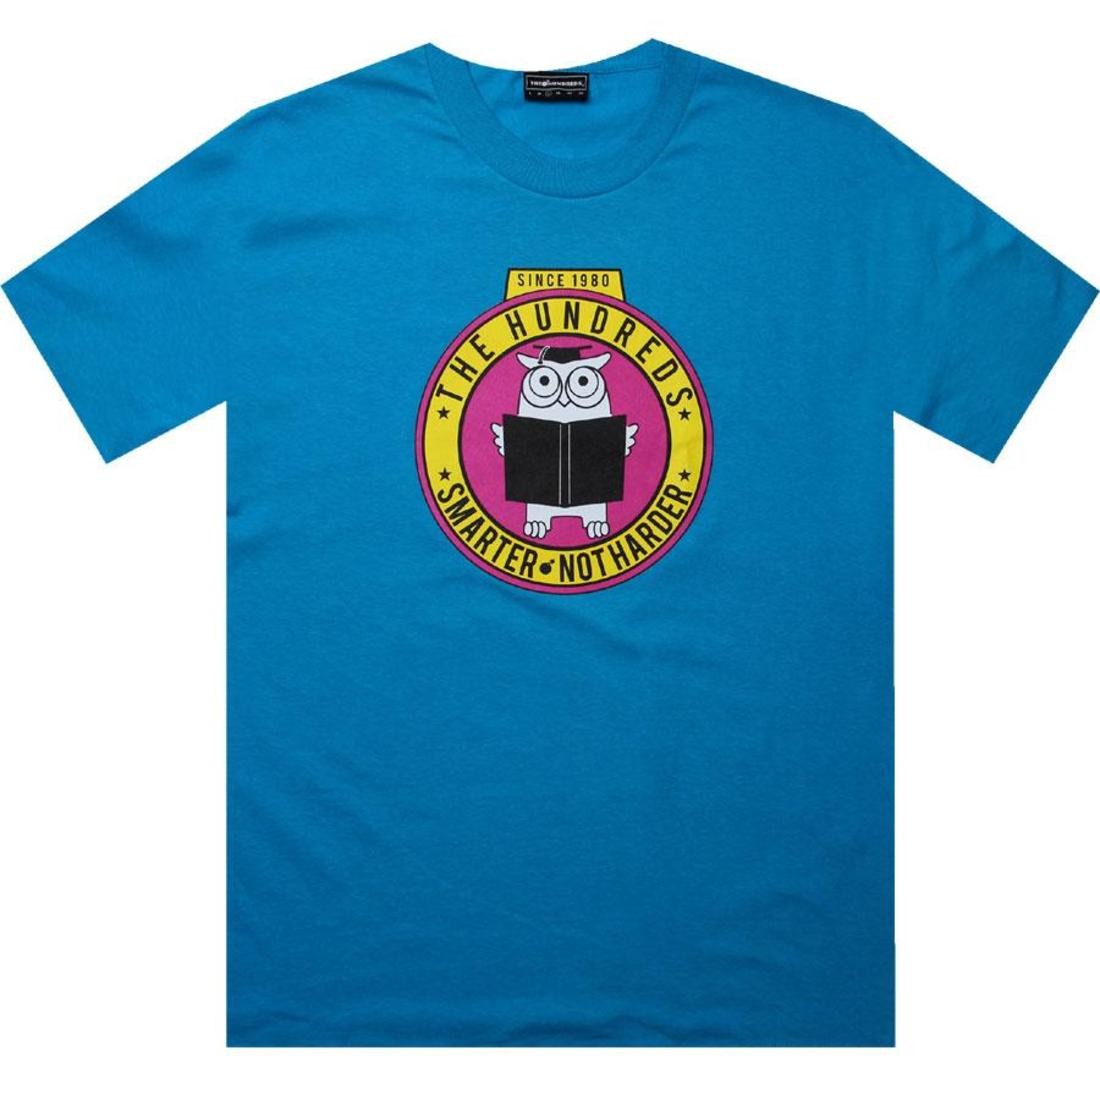 The Hundreds Smarter Tee (turquoise)